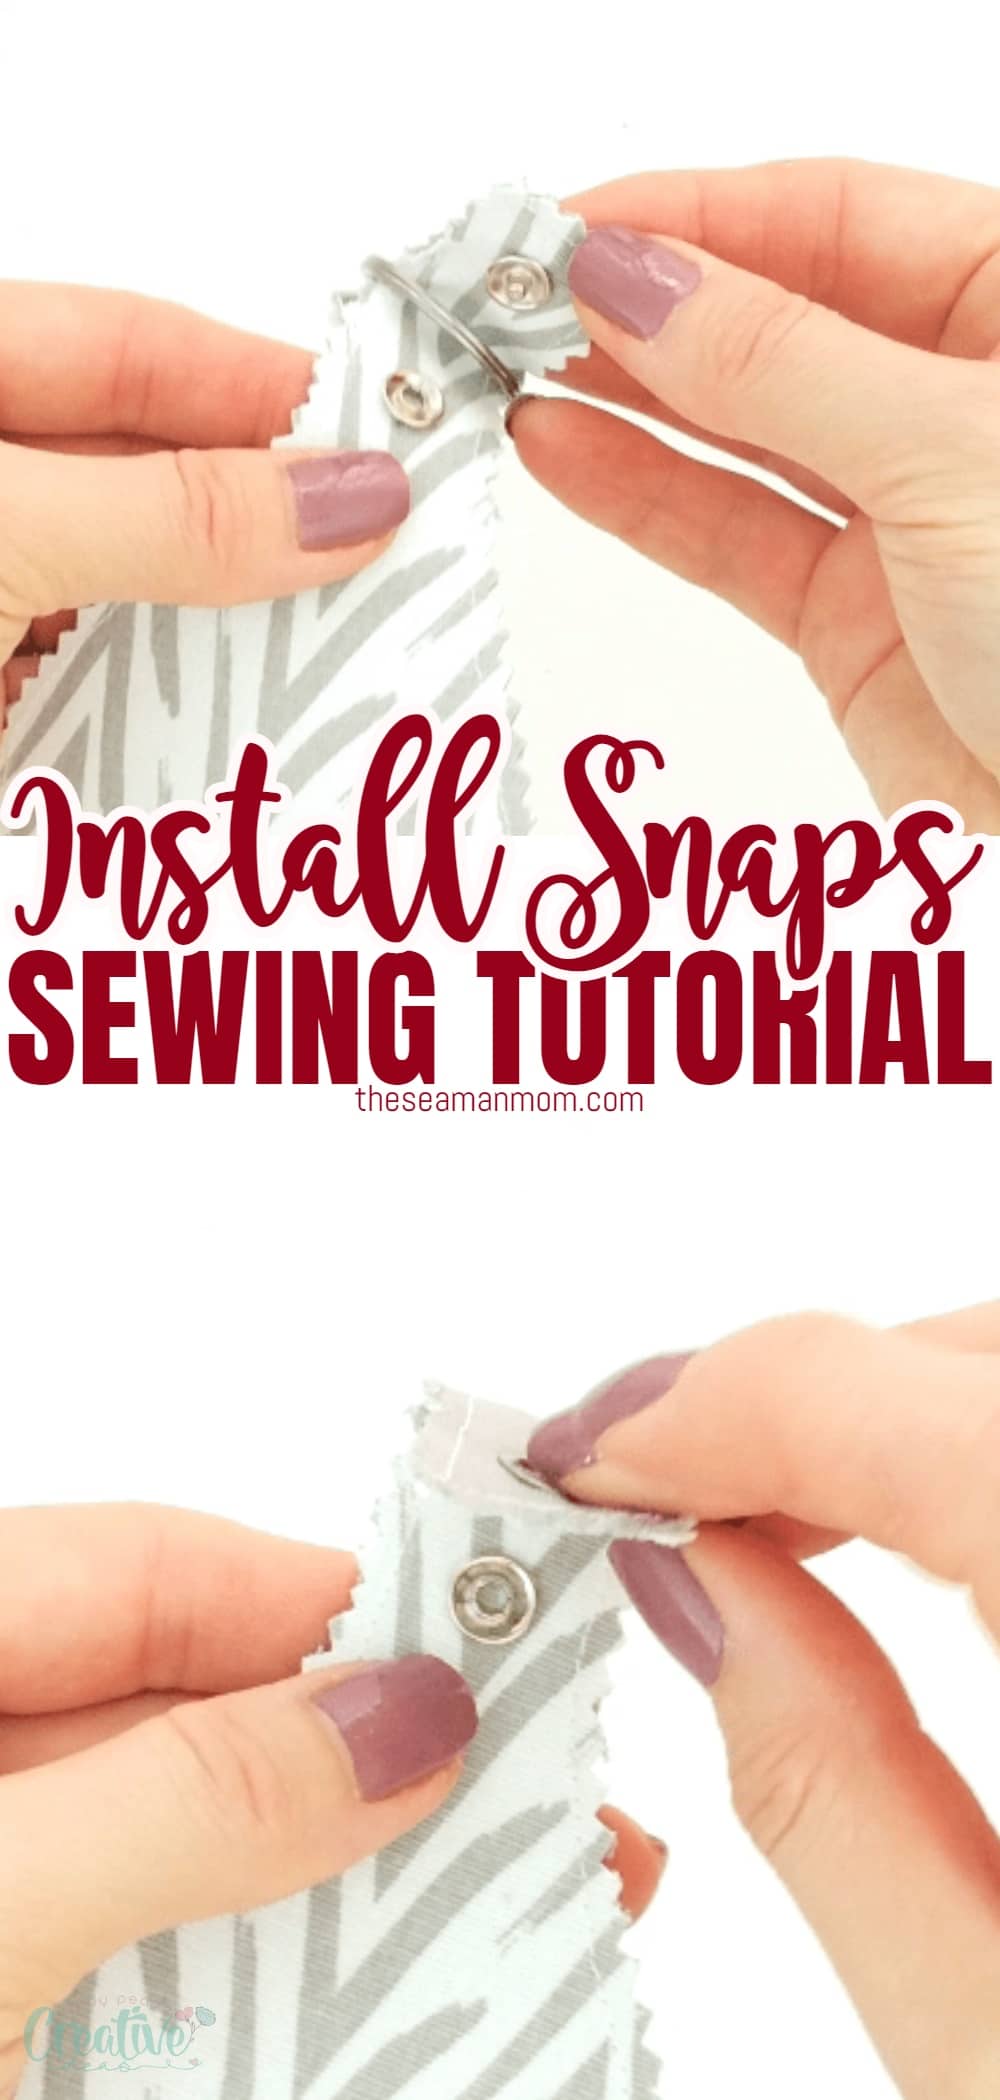 If you're looking for an easy way to put snaps on fabric, you're in the right place. In this sewing tutorial, I'll show you how to install snaps using snap pliers. This is a simple process that anyone can do - no thread and needle necessary, perfect project for a beginner sewer! So let's get started! via @petroneagu